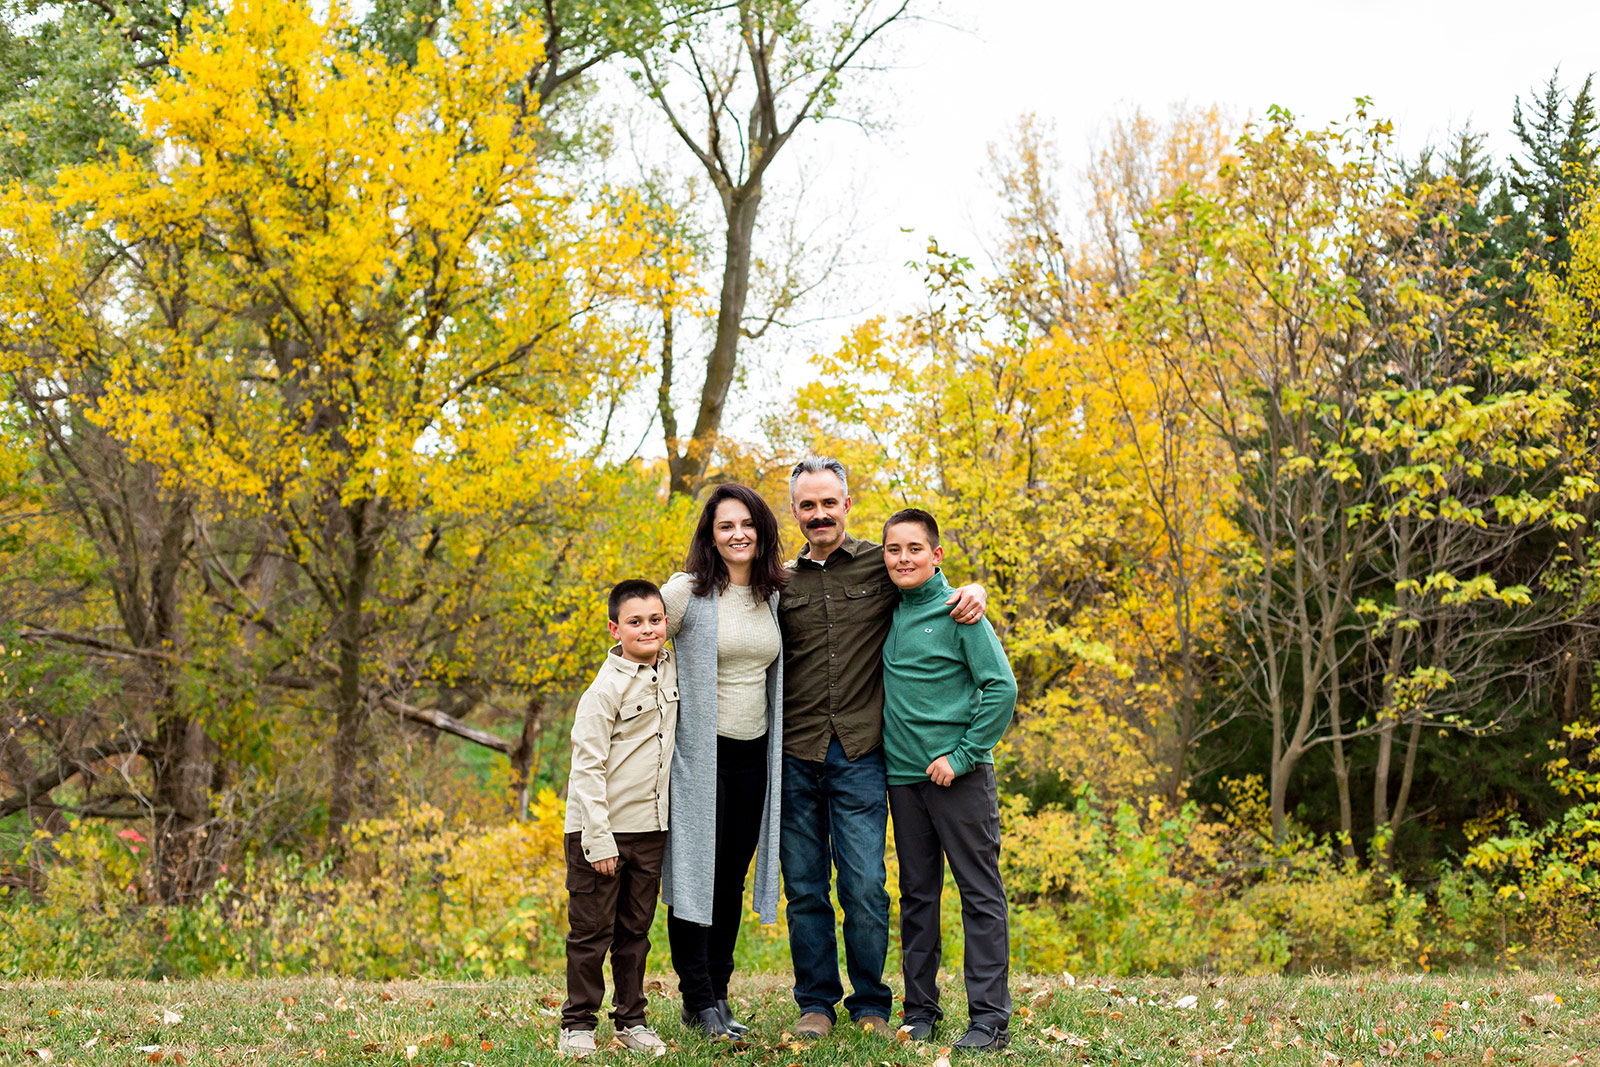 The boys stand casually with their parents in front of a beautiful mass of yellow trees..